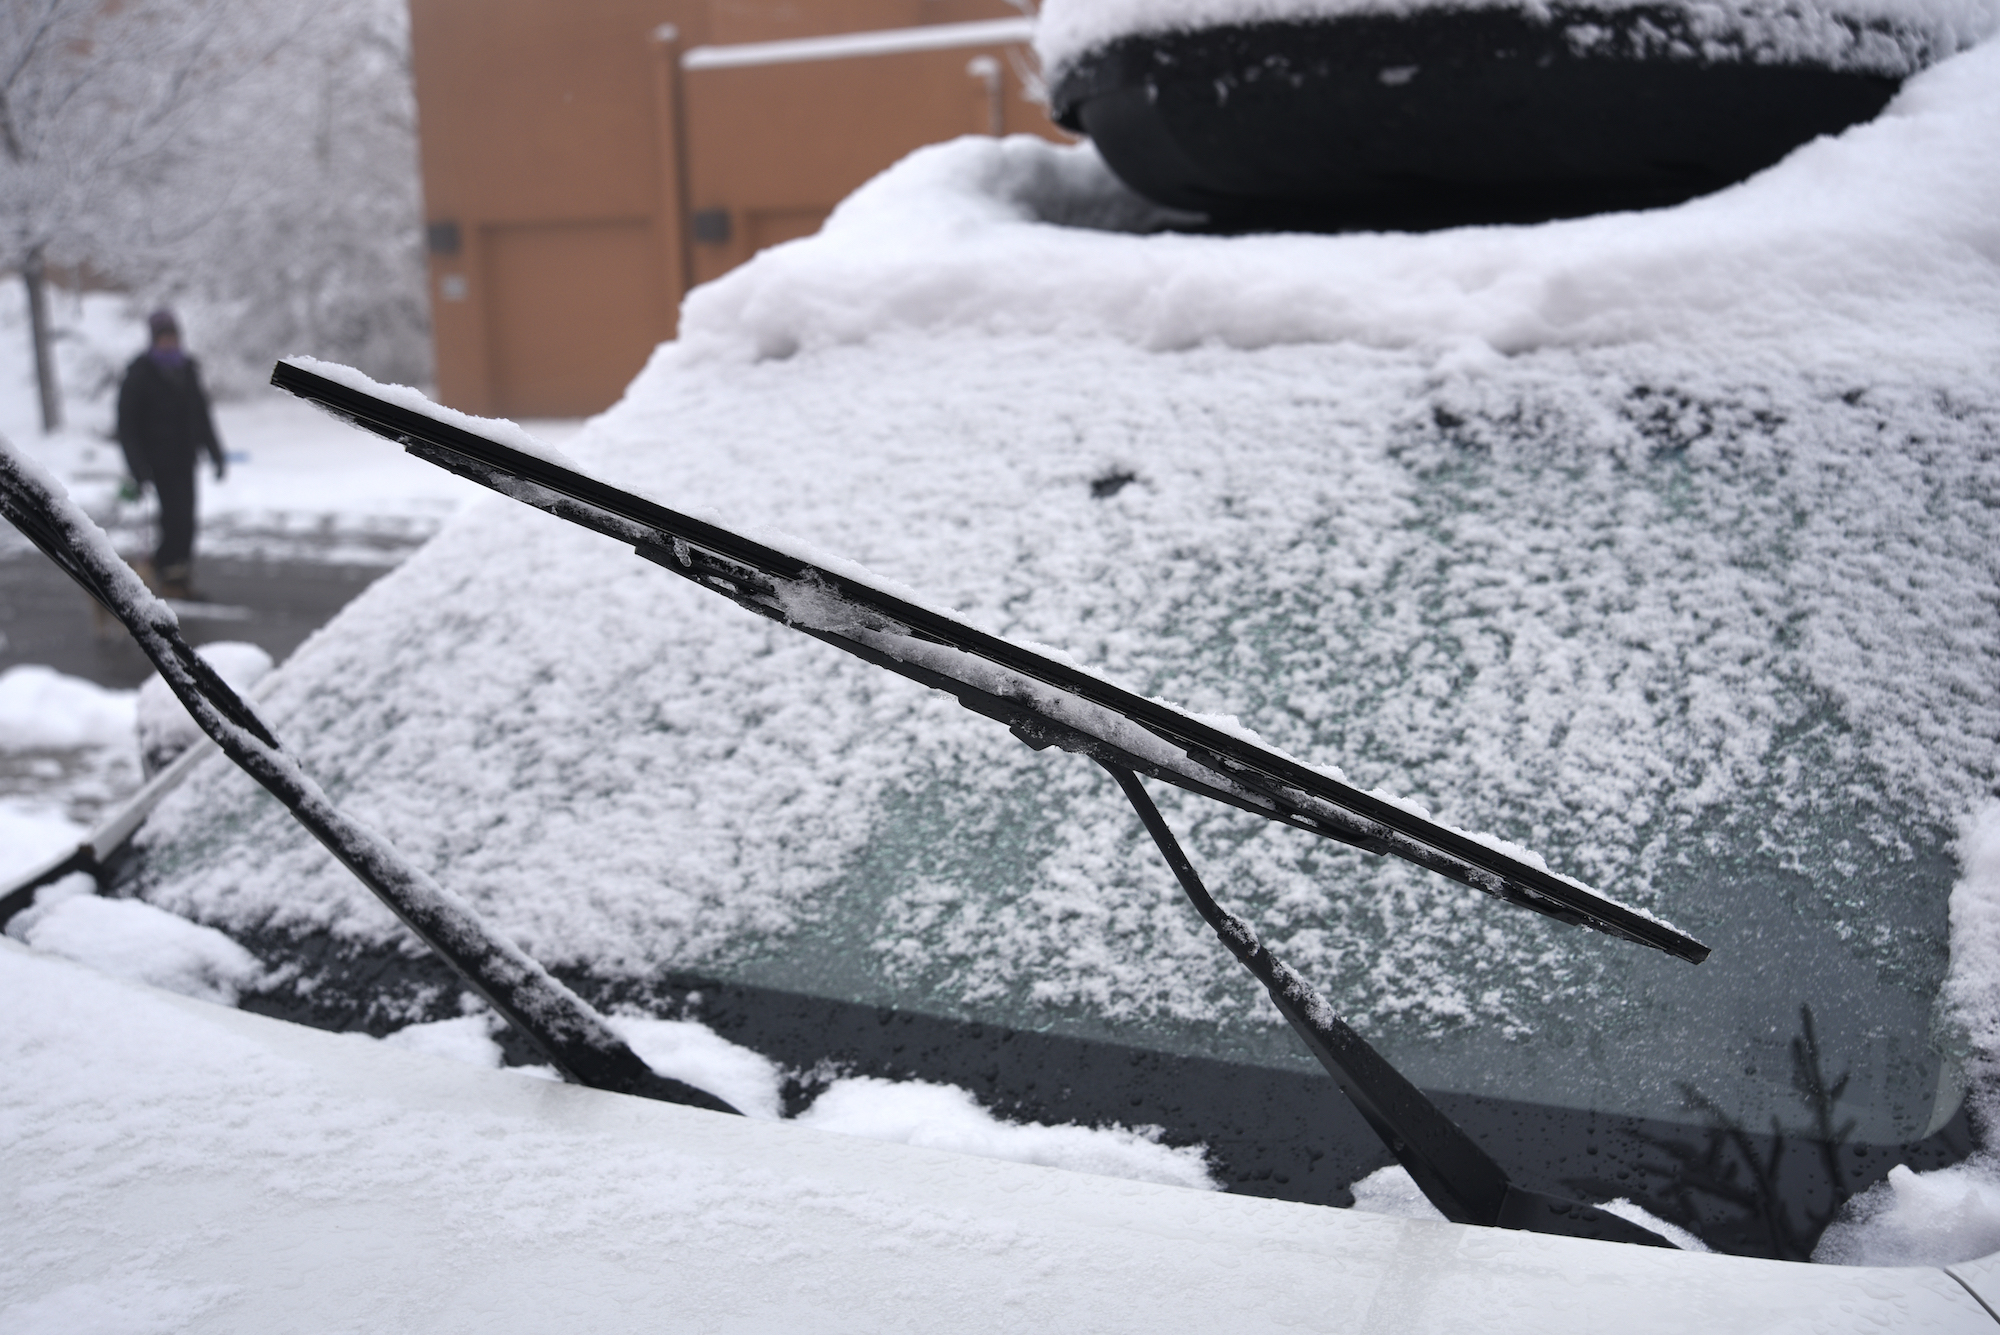 A car in new mexico has it's windshield wiper blades up